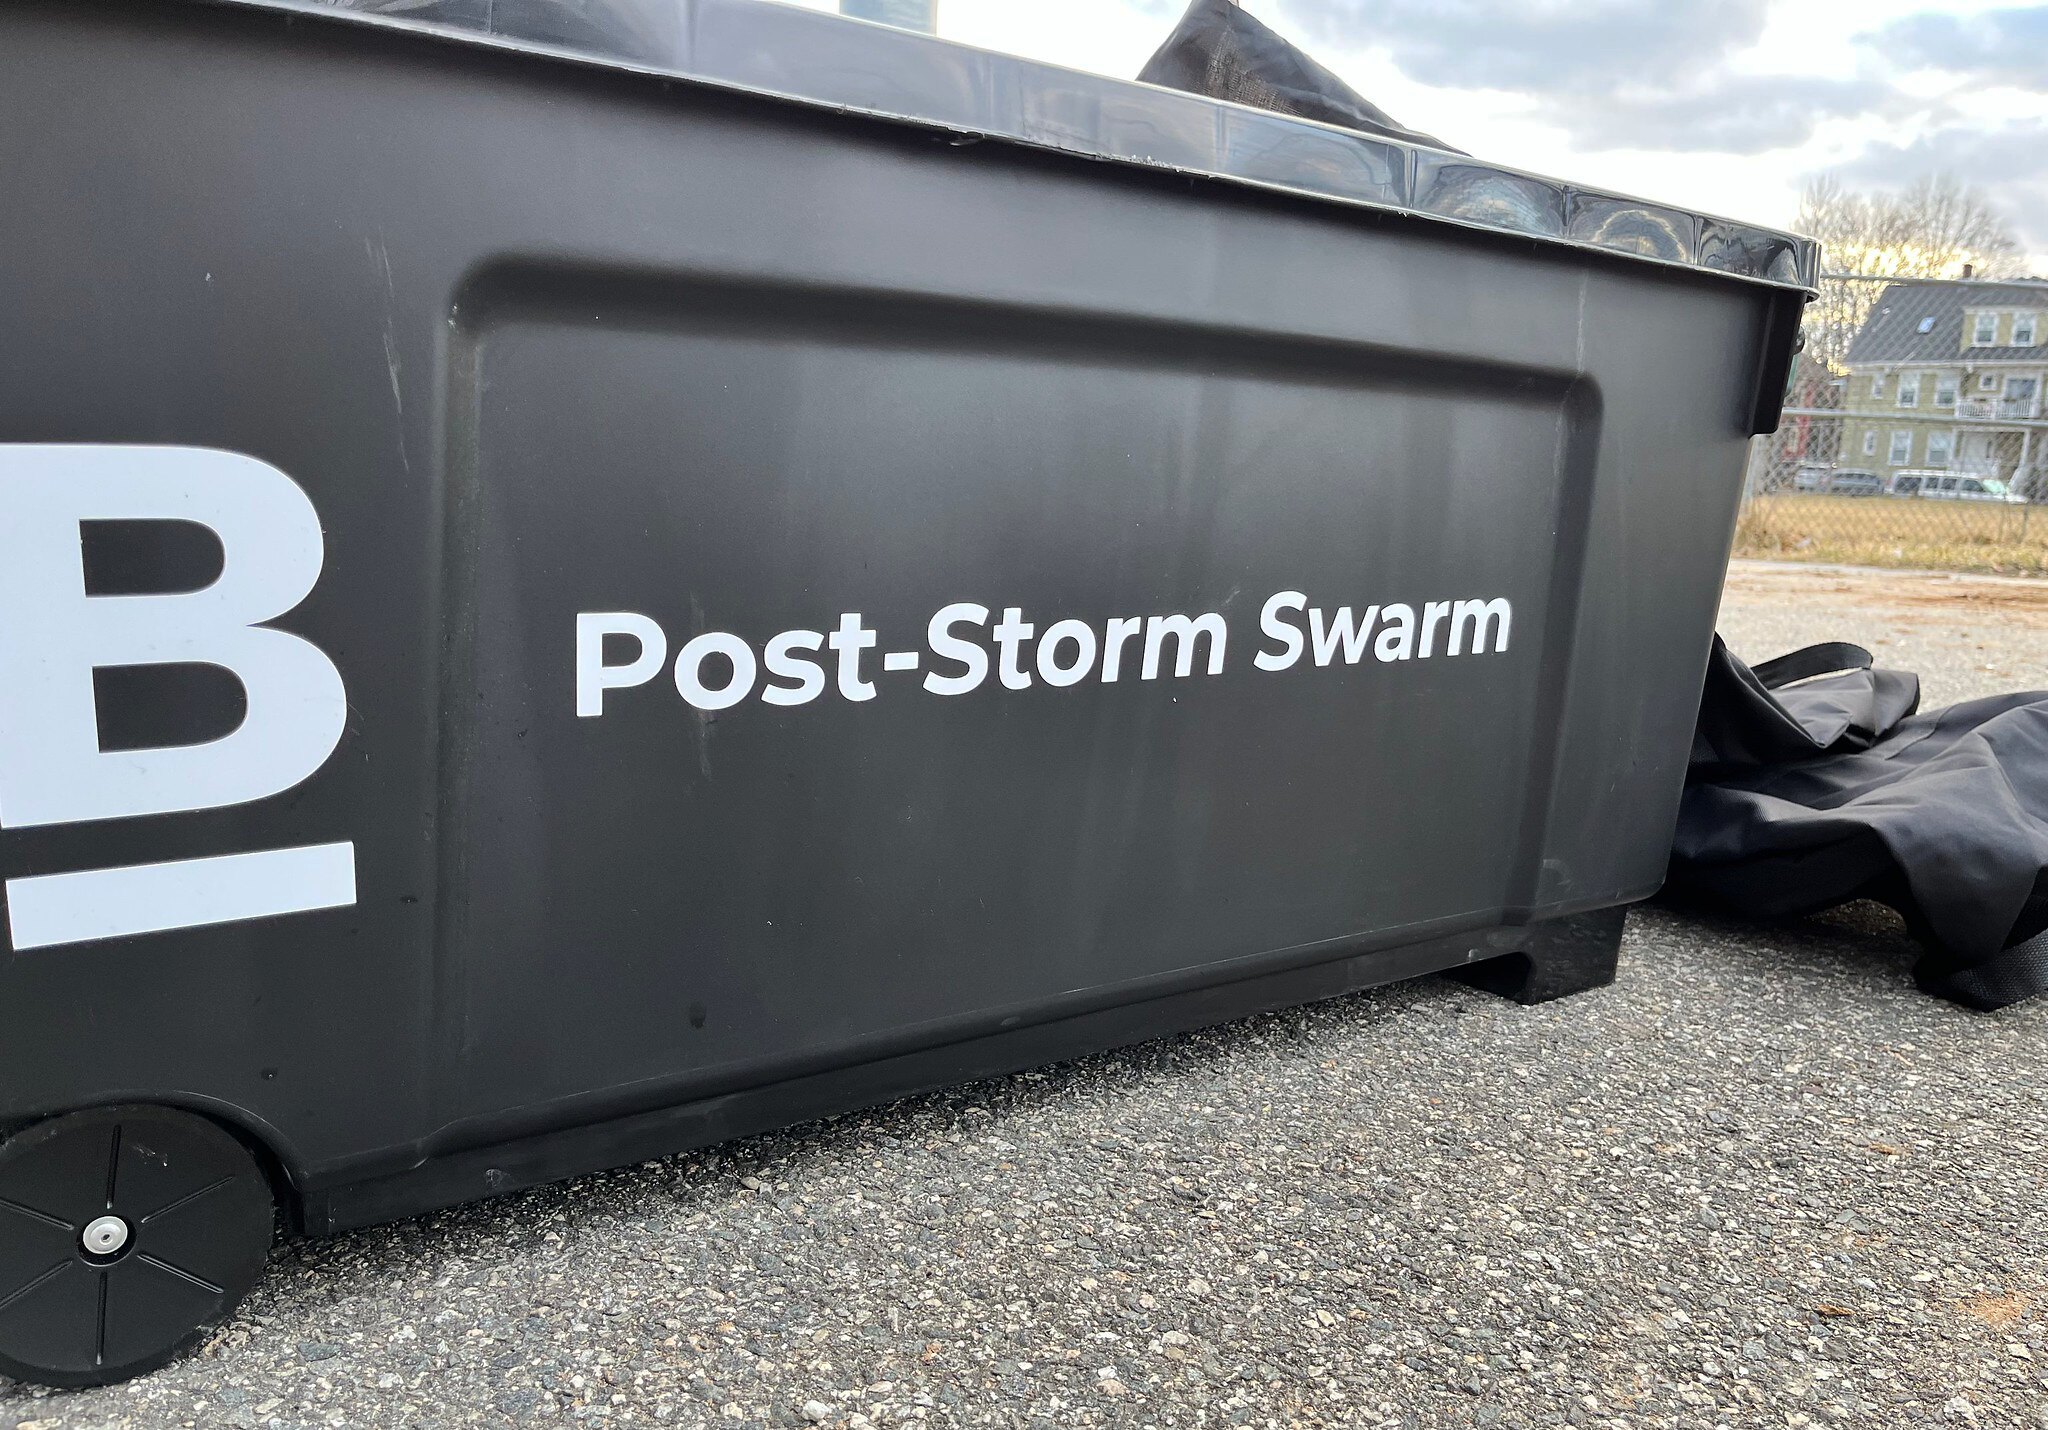 A large black bin sits on the ground marked with the City of Boston logo and a label that reads "Post-Storm Swarm"